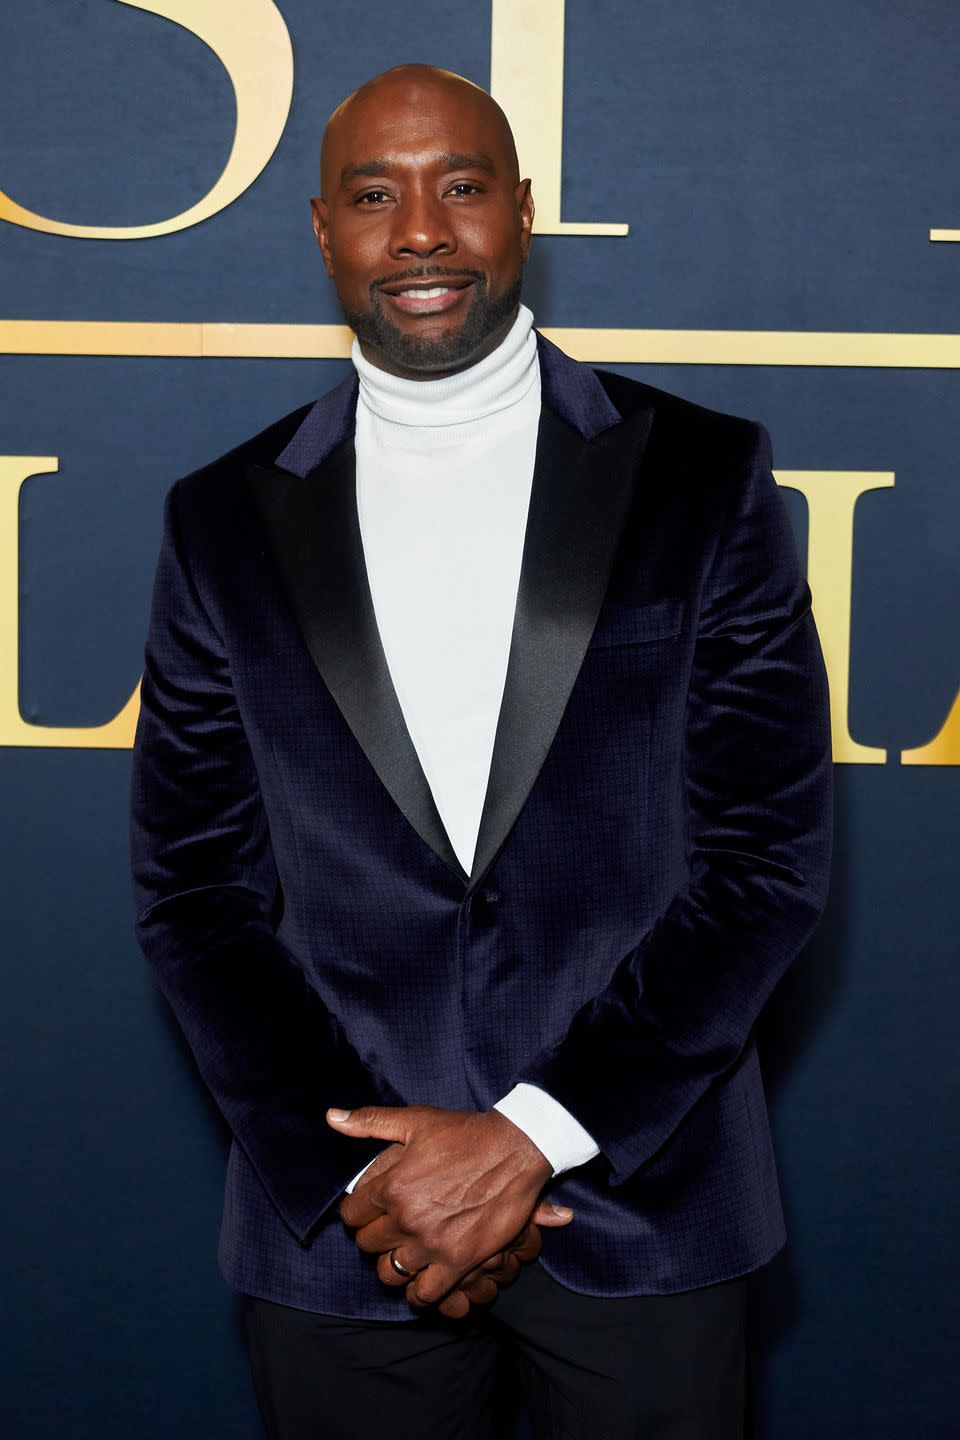 morris chestnut posing for a picture with a smile on his face, wearing a white roll neck jumper and navy blue suit jacket